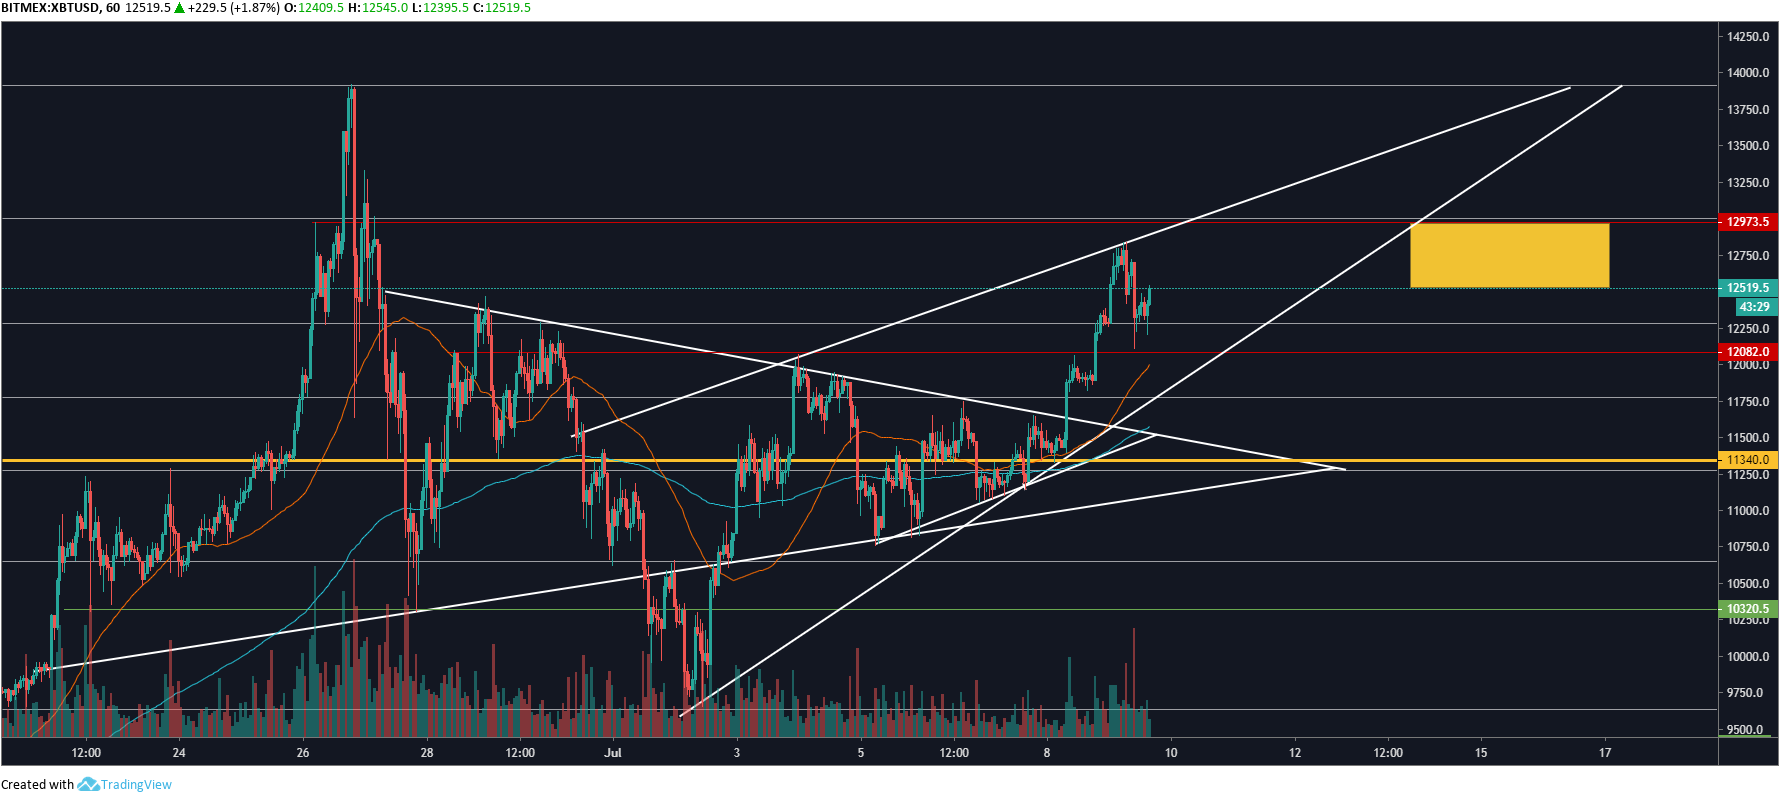 Bitcoin Price Analysis: Bulls Win Compelling Breakout